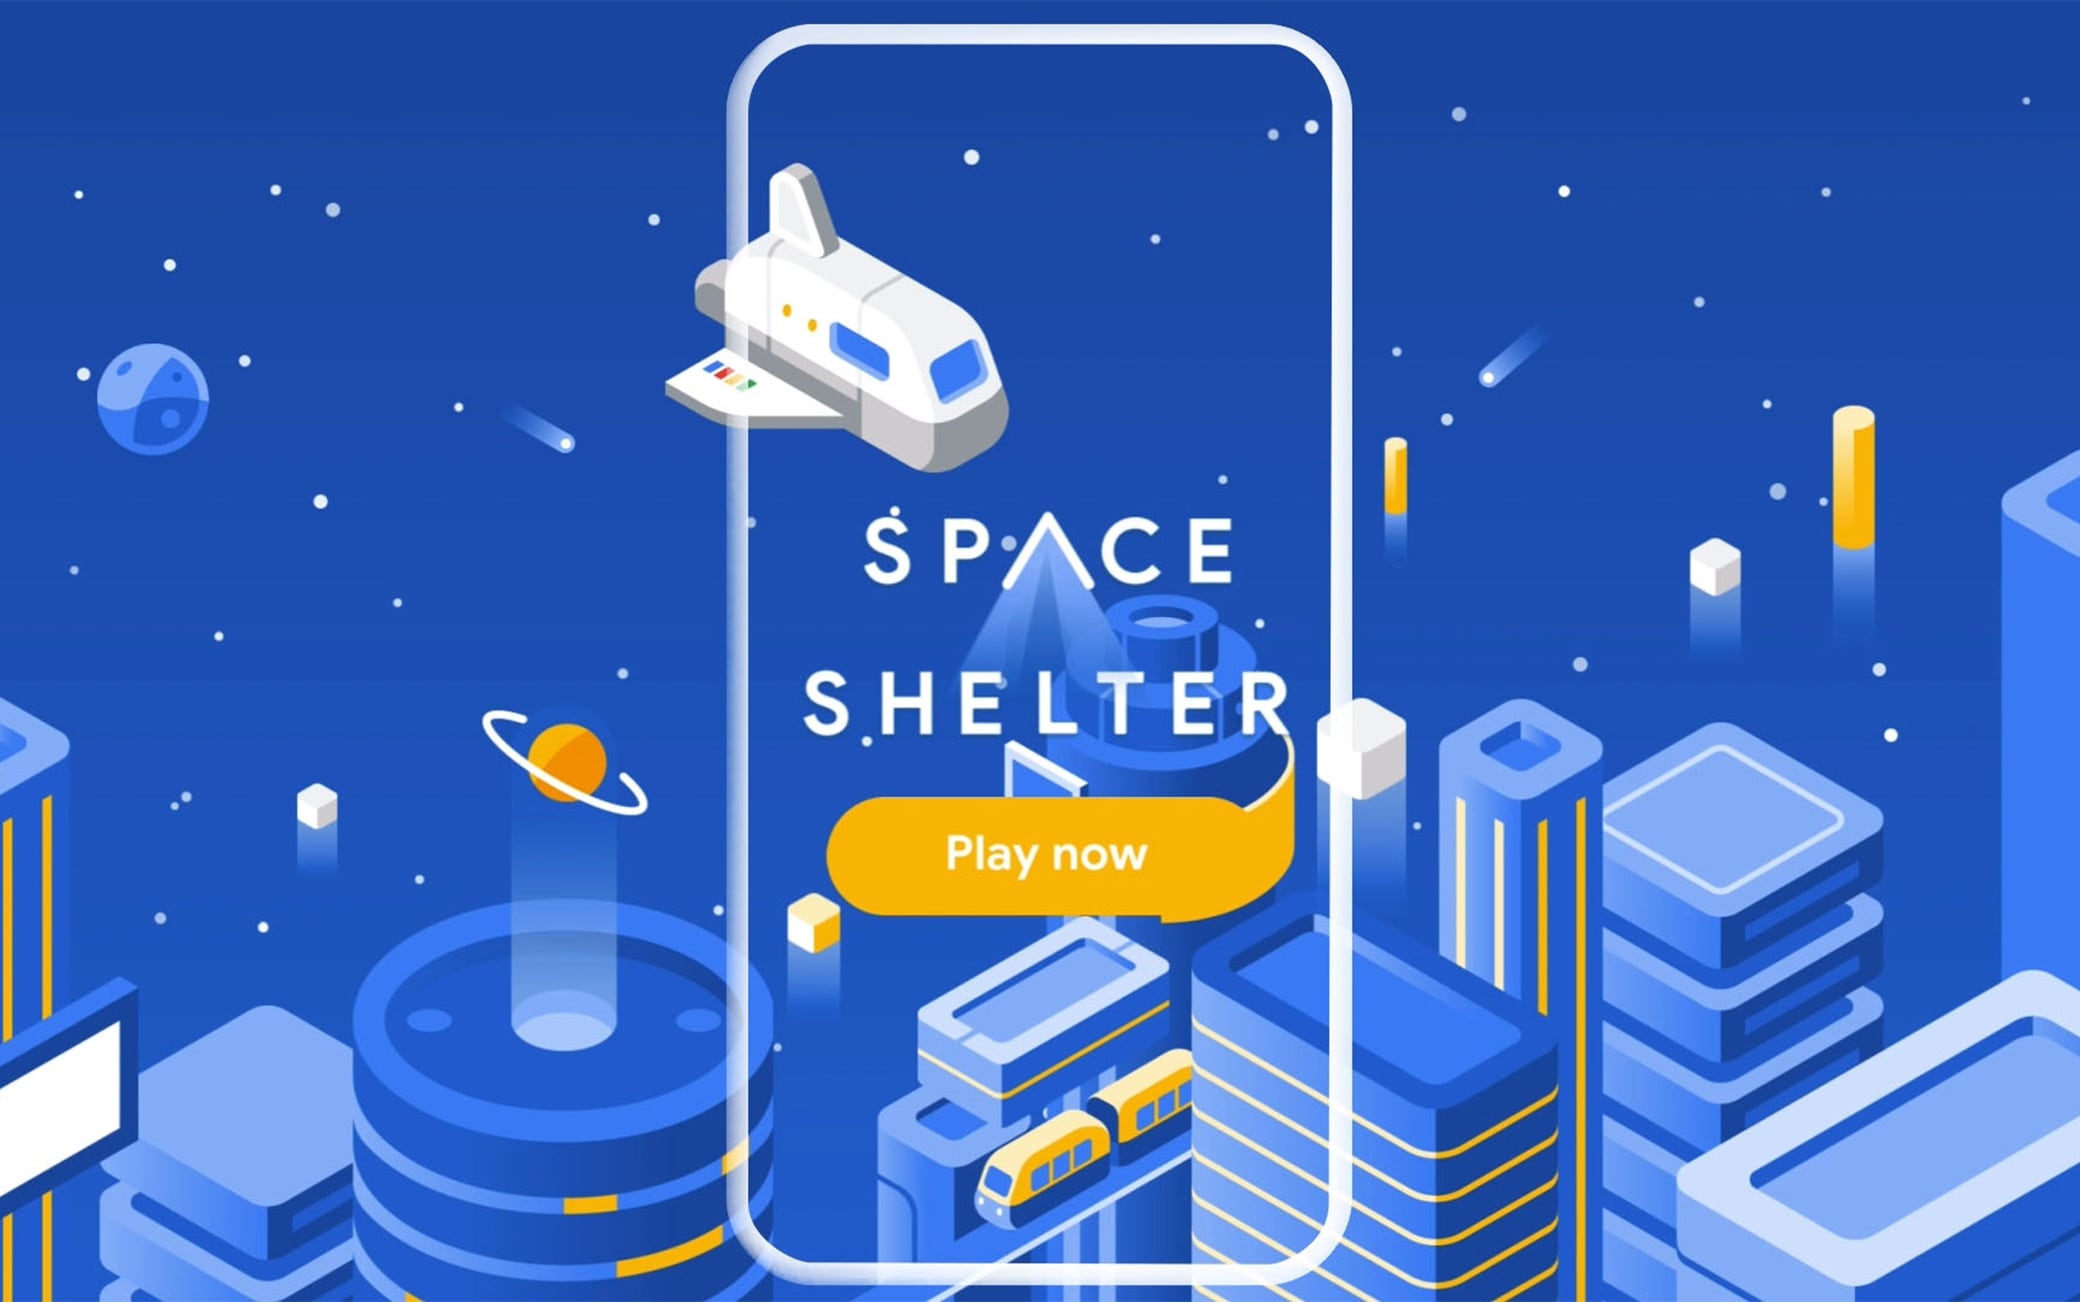 Space Shelter, the videogame arrives to learn online safety